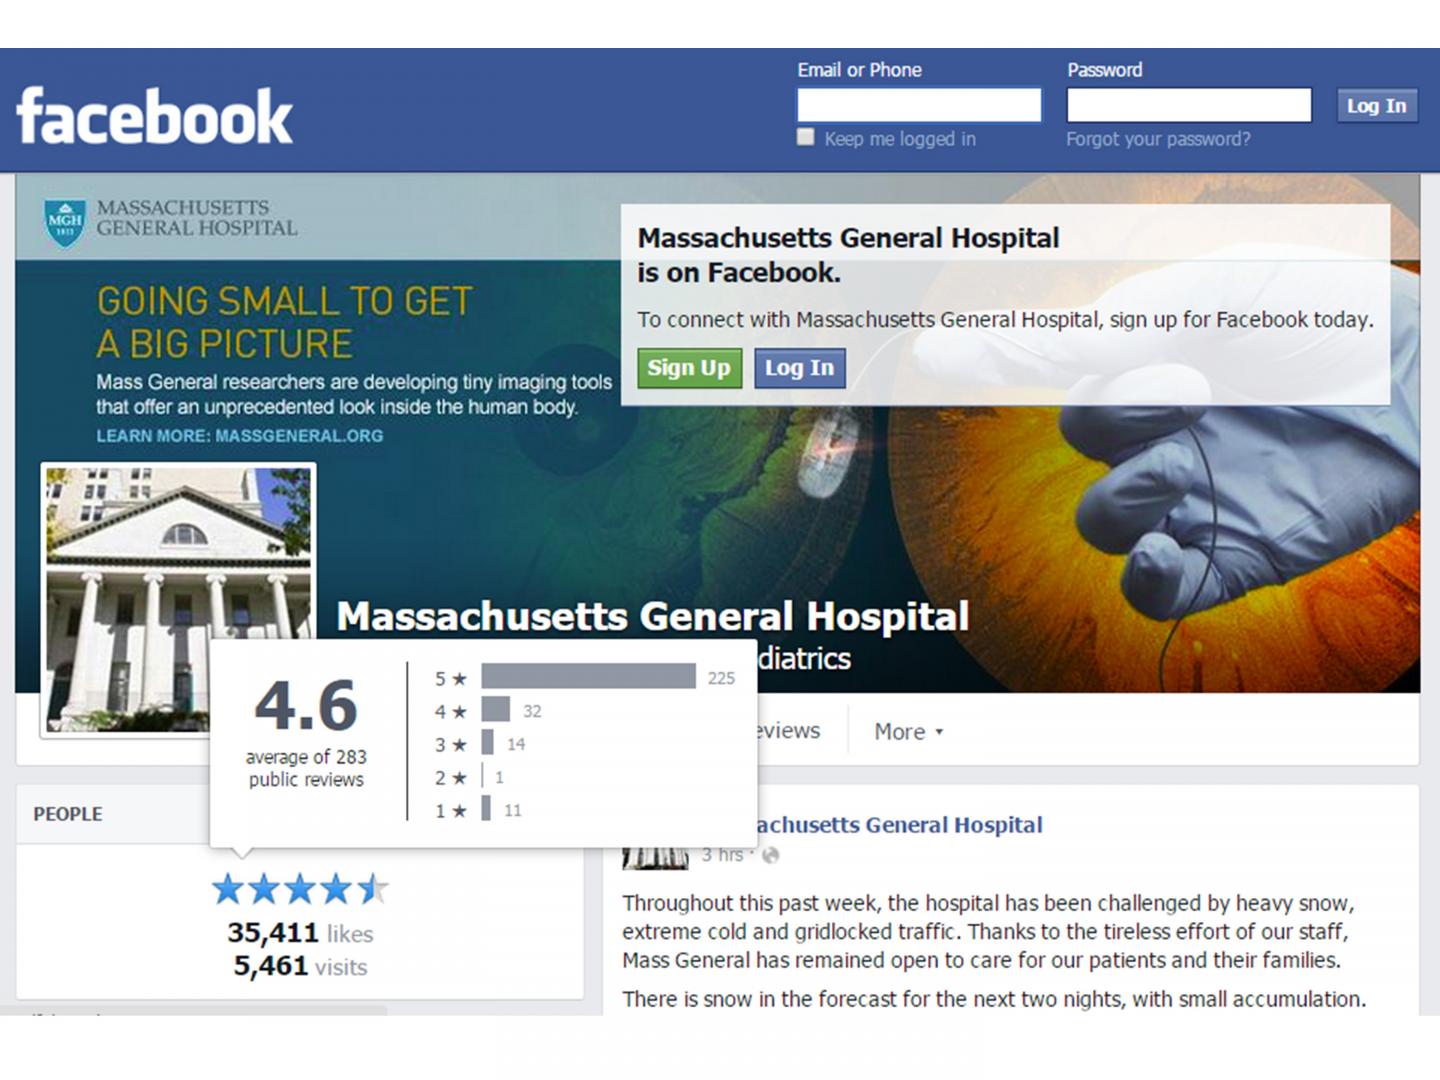 User Ratings on Hospital Facebook Page